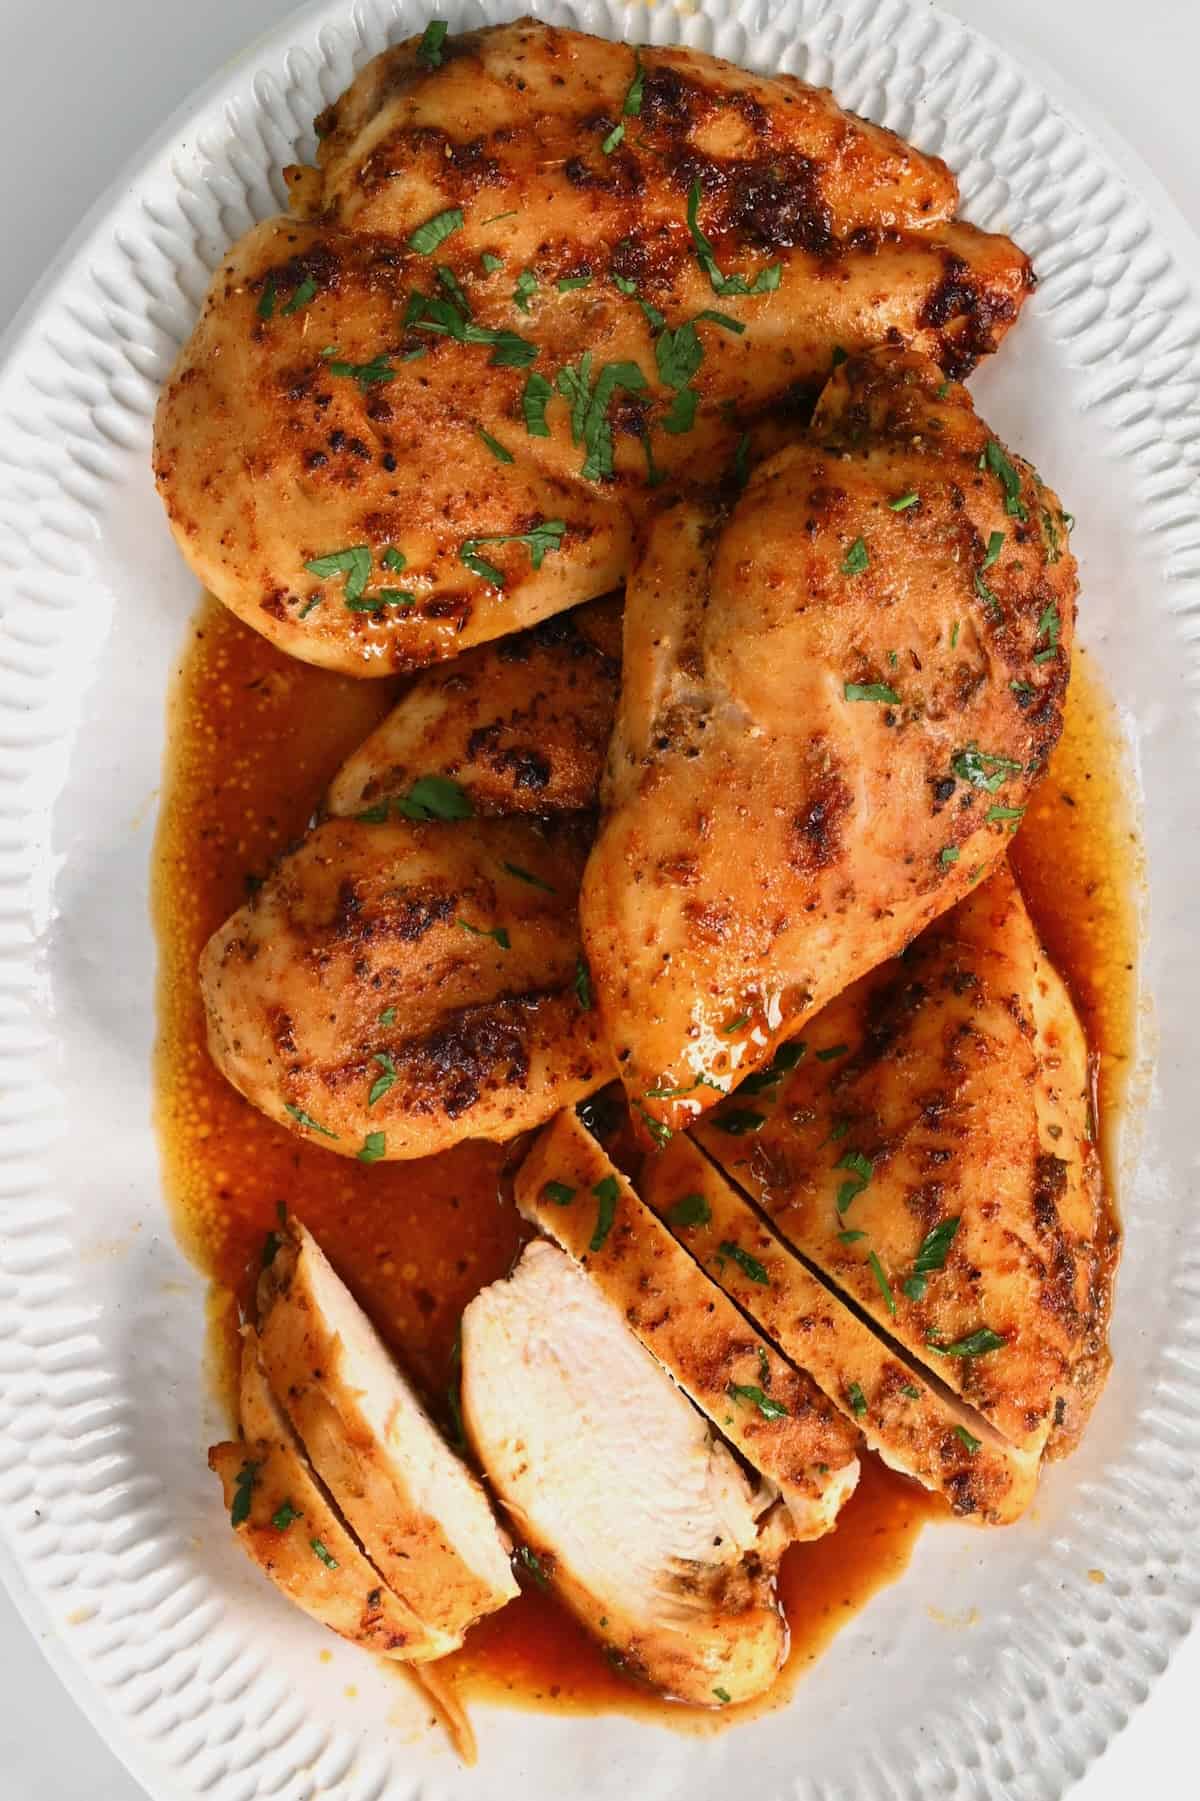 Baked chicken on a plate